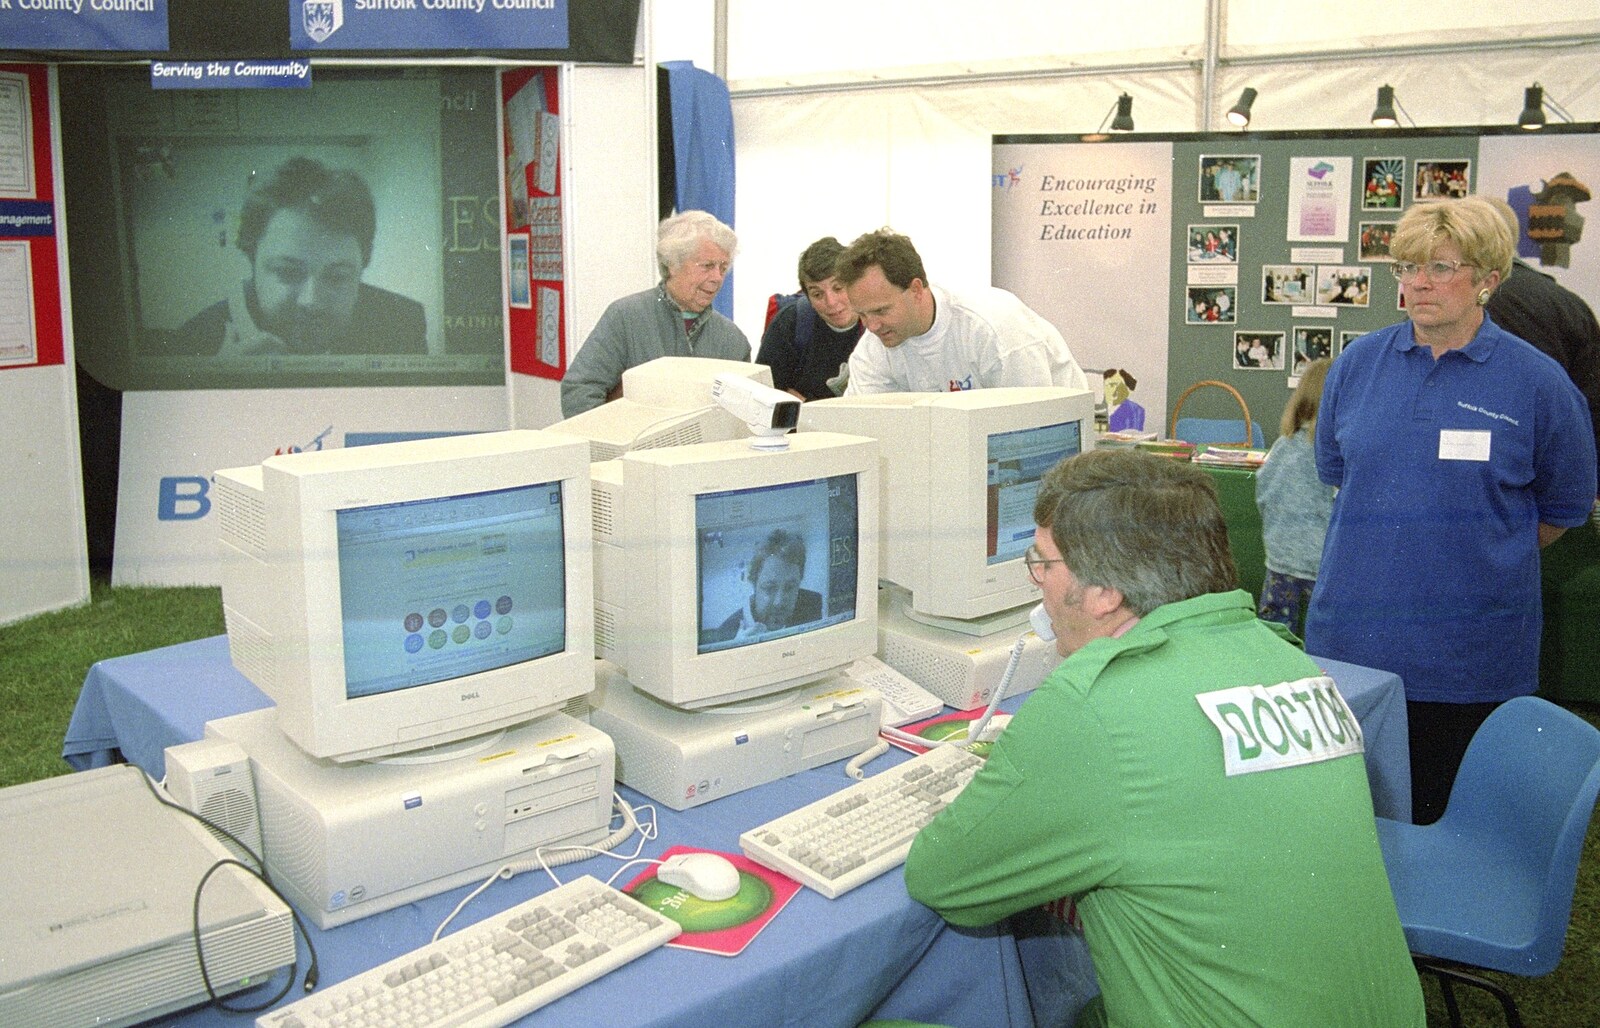 Suffolk County Concillor Chris Mole video-conferences with a Doctor in a tent in a field at the Suffolk S<span class='hilite'>how</span> in 1997. The video is running over a temporary ISDN line installed by BT for the occasion. The system was also used by a deaf group and it enabled them to use sign language with people not in line of sight for the first time ever.